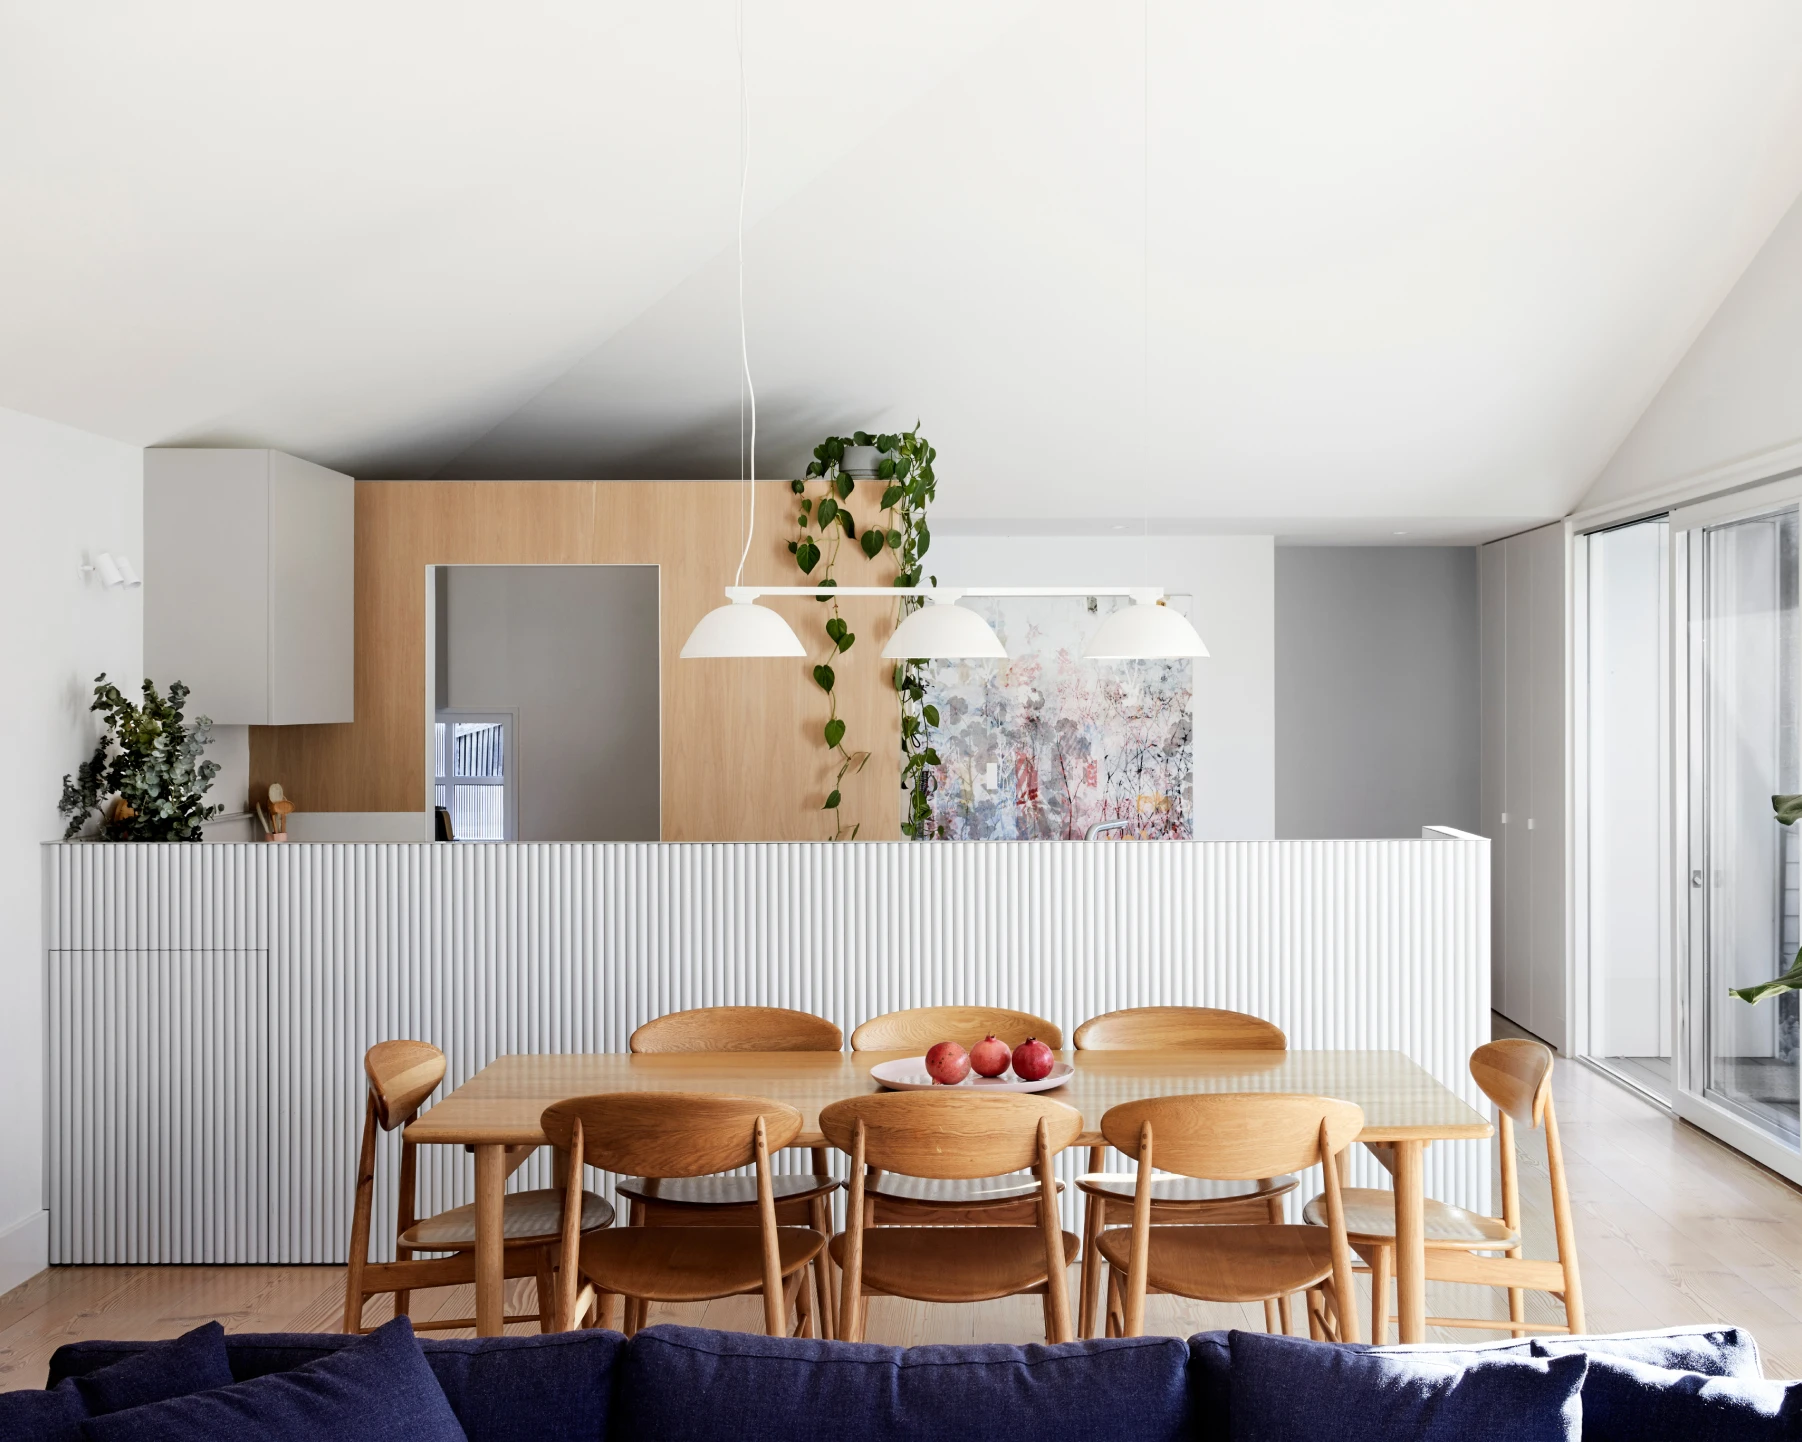 Kitchen and dining area with Natural White walls, bench backing and ceiling and including timber pantry and dining table.